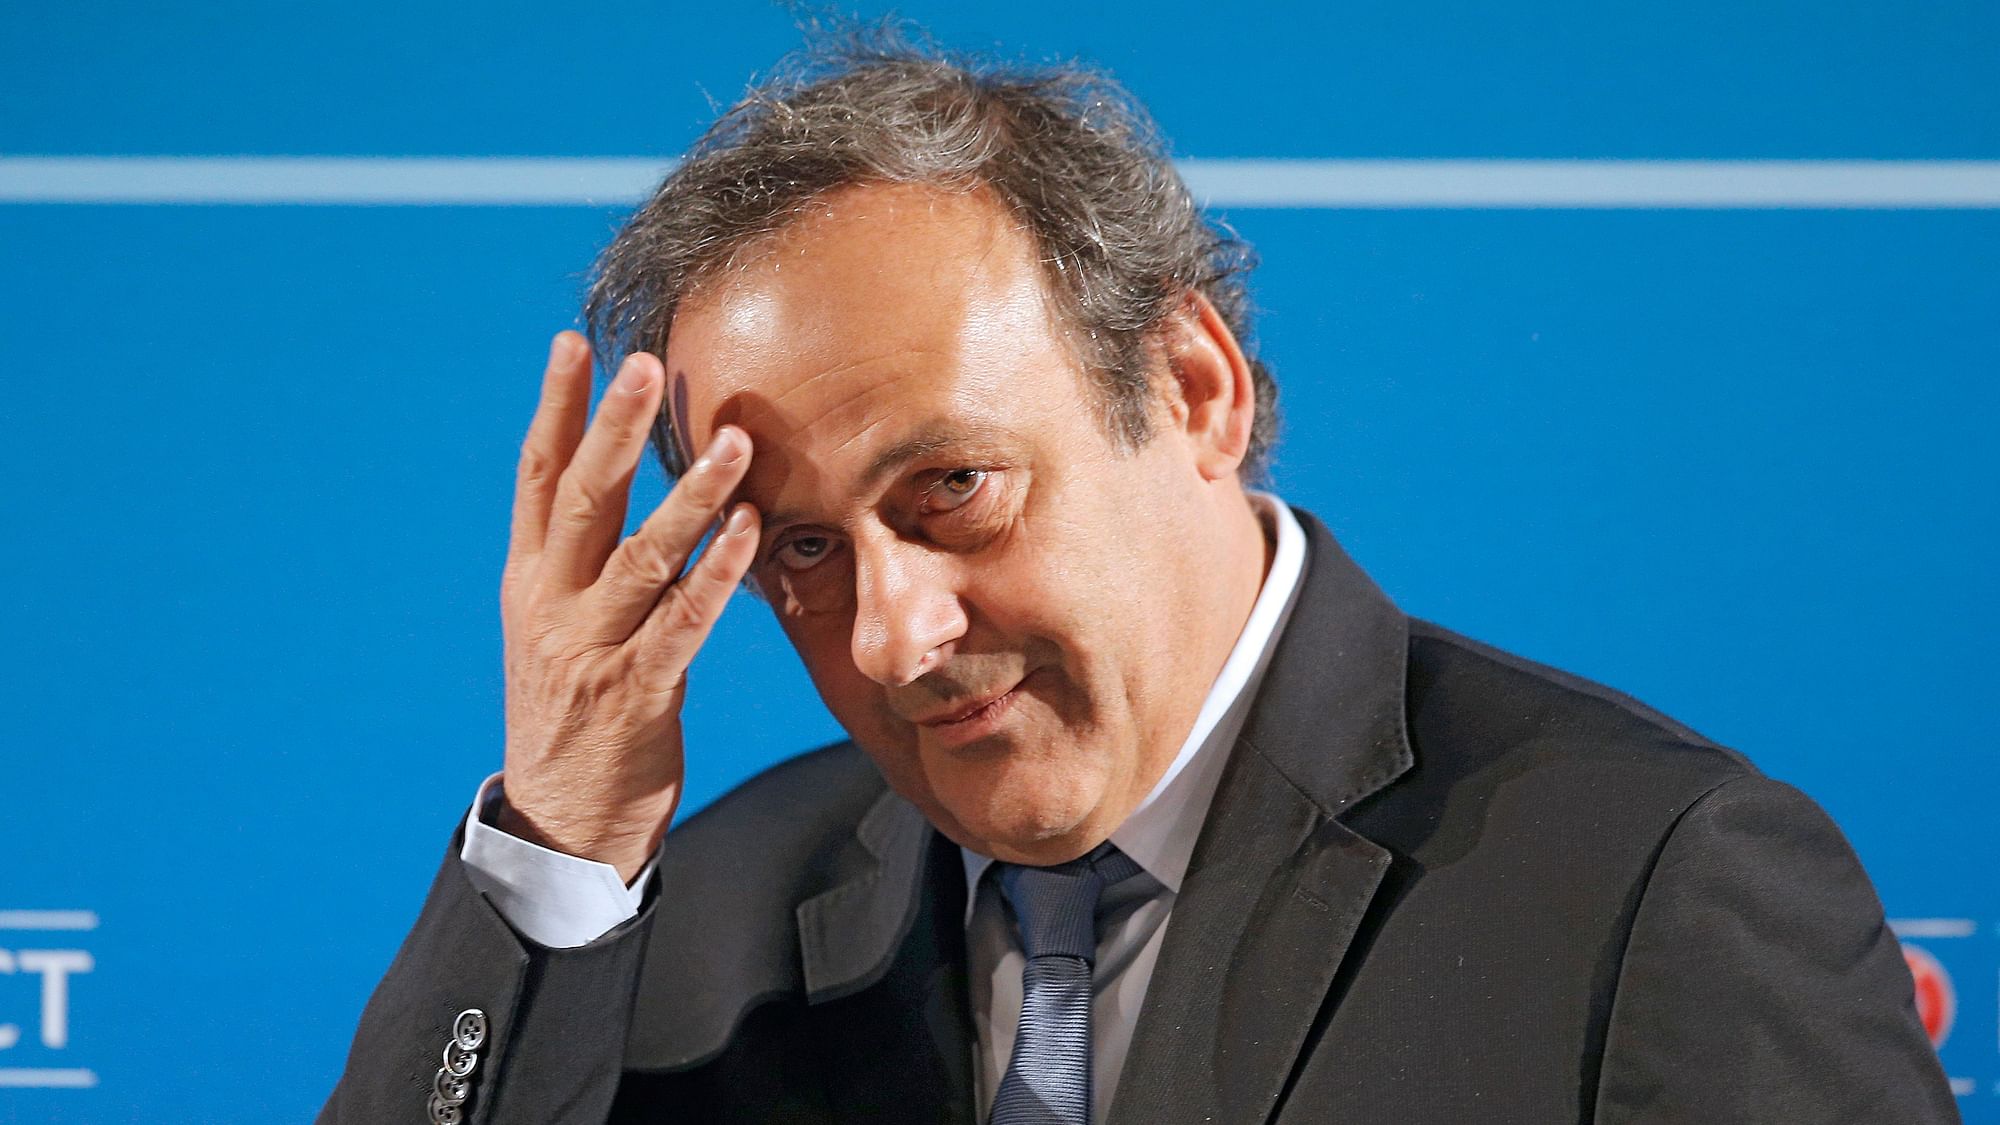 Former UEFA president Michel Platini has been arrested in relation to the awarding of the 2022 World Cup to Qatar.